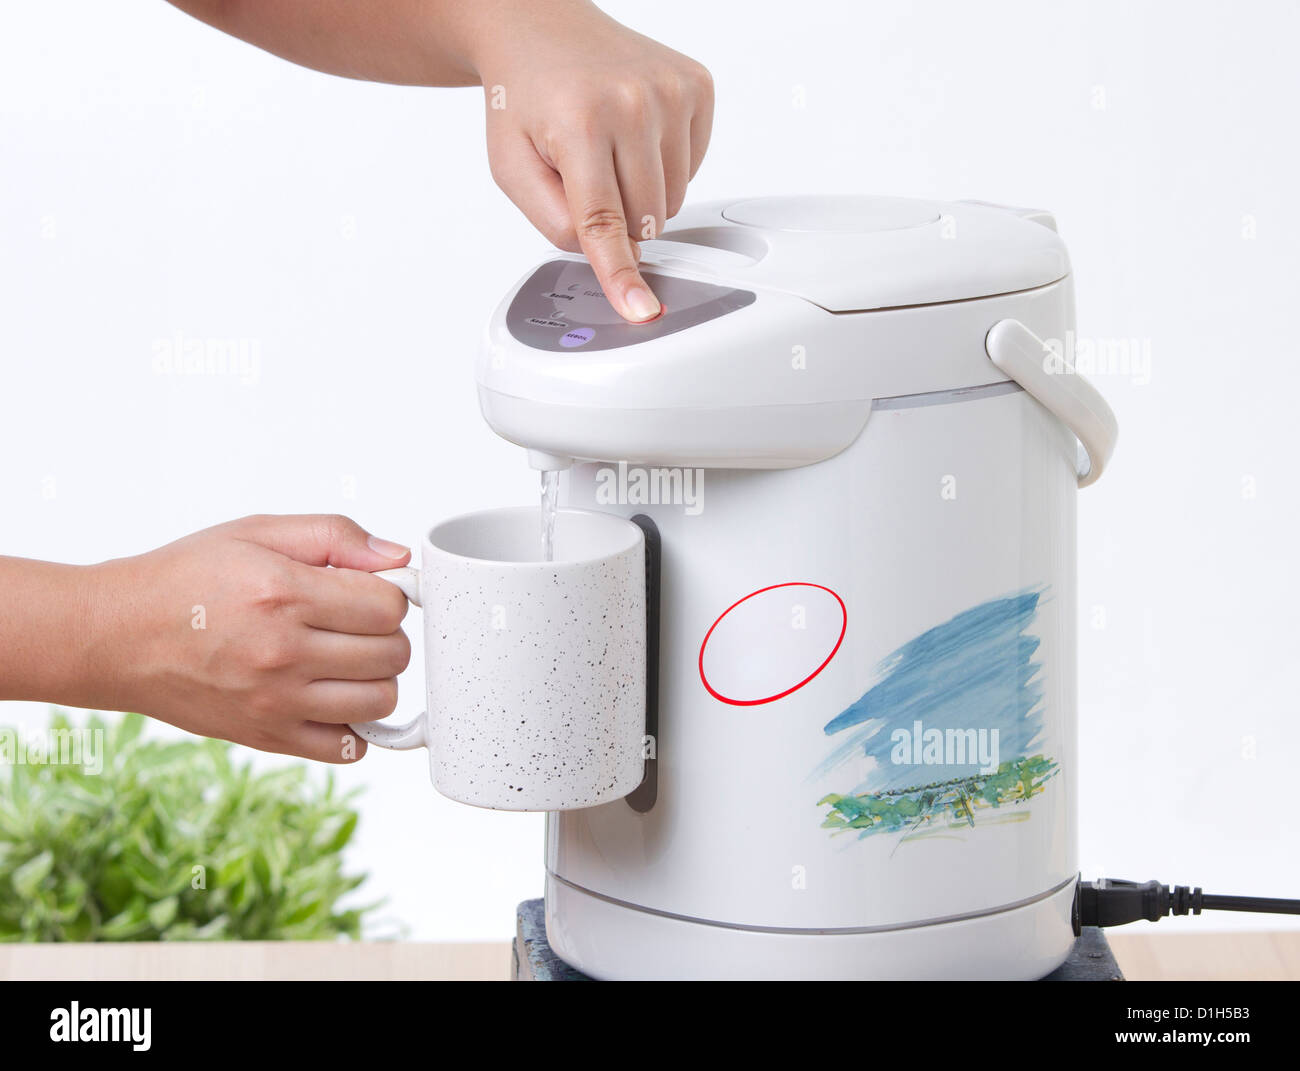 https://c8.alamy.com/comp/D1H5B3/pouring-hot-drinking-from-electric-water-boiler-pot-D1H5B3.jpg